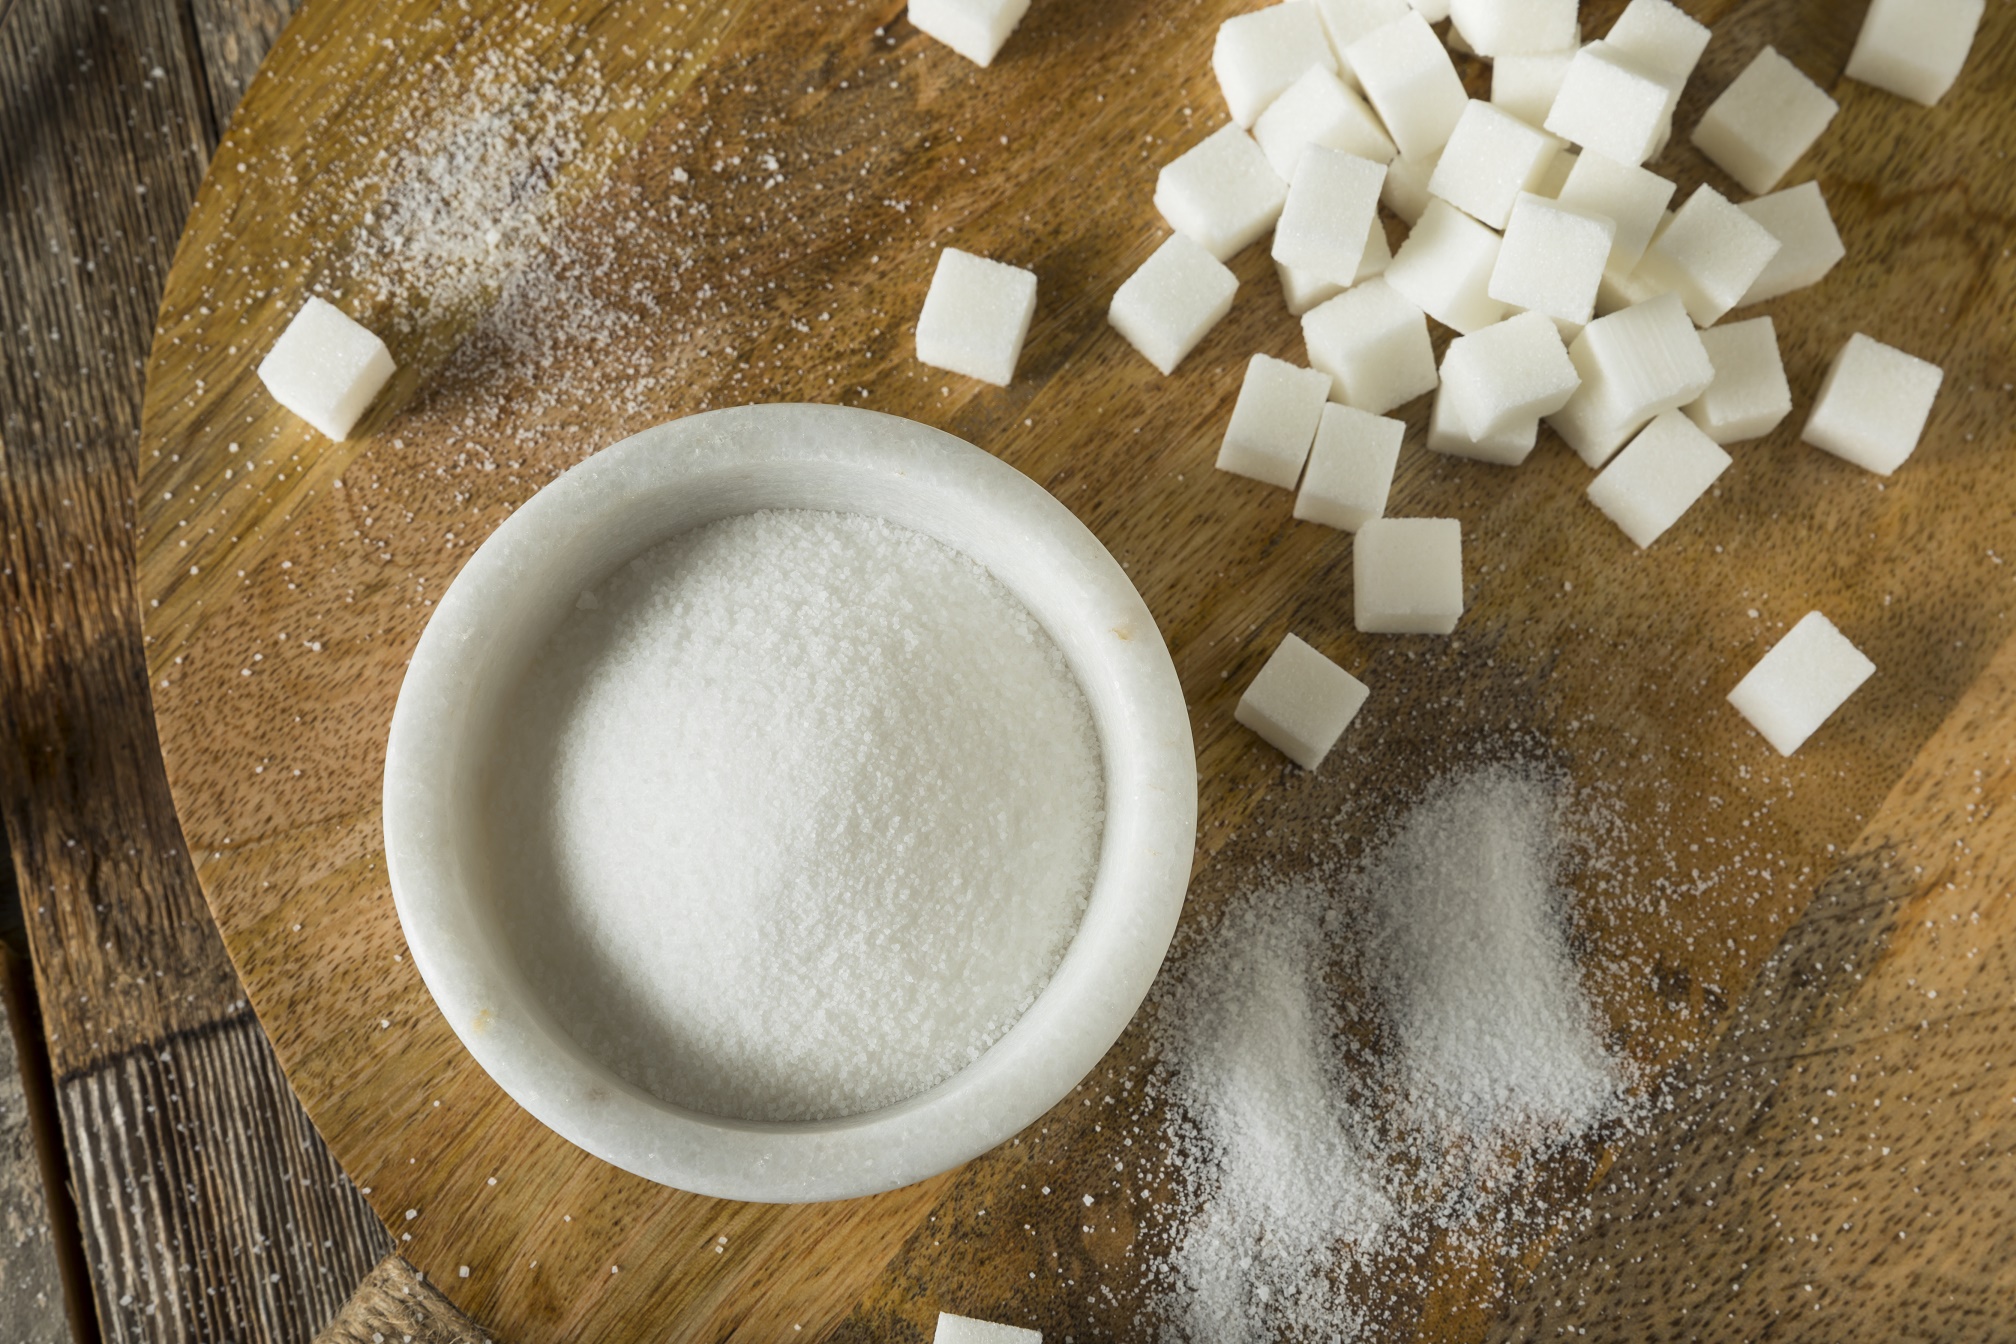 Results are in- sugar does not improve mood in adults